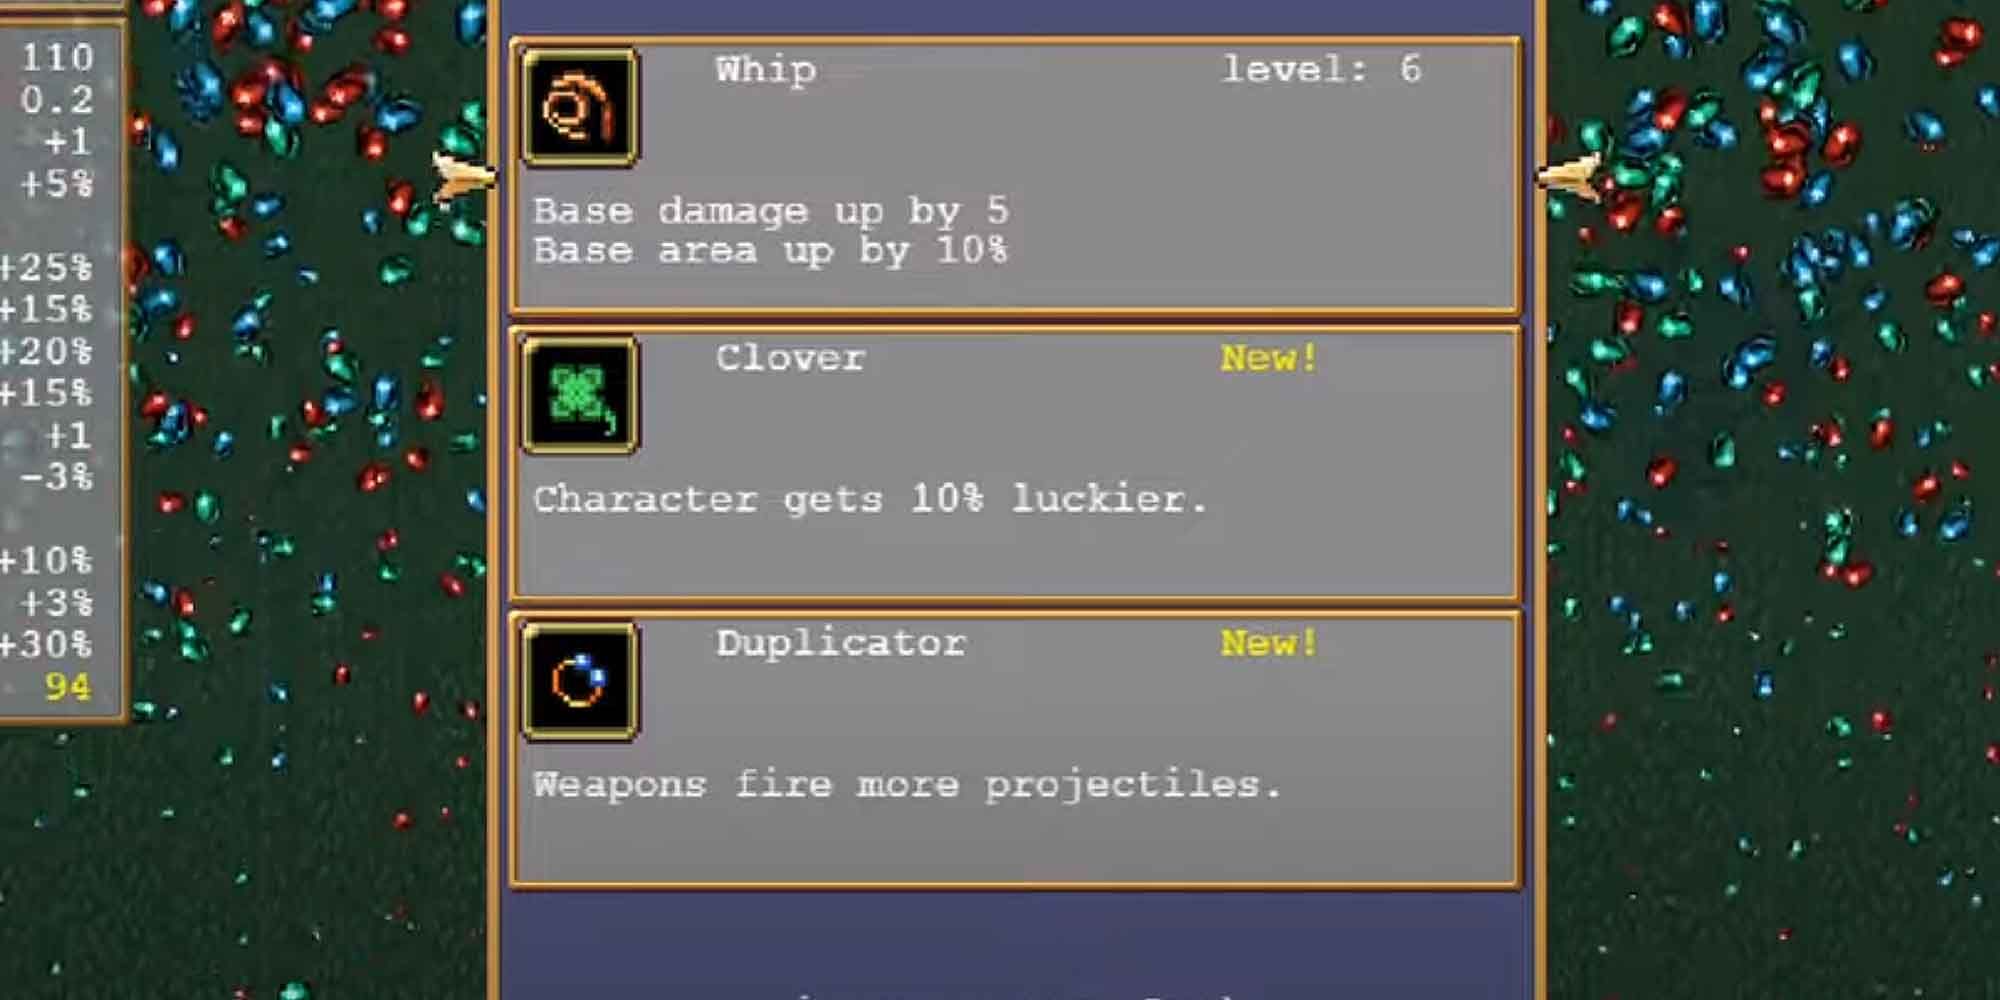 Getting the Clover as an option when leveling-up in Vampire Survivors